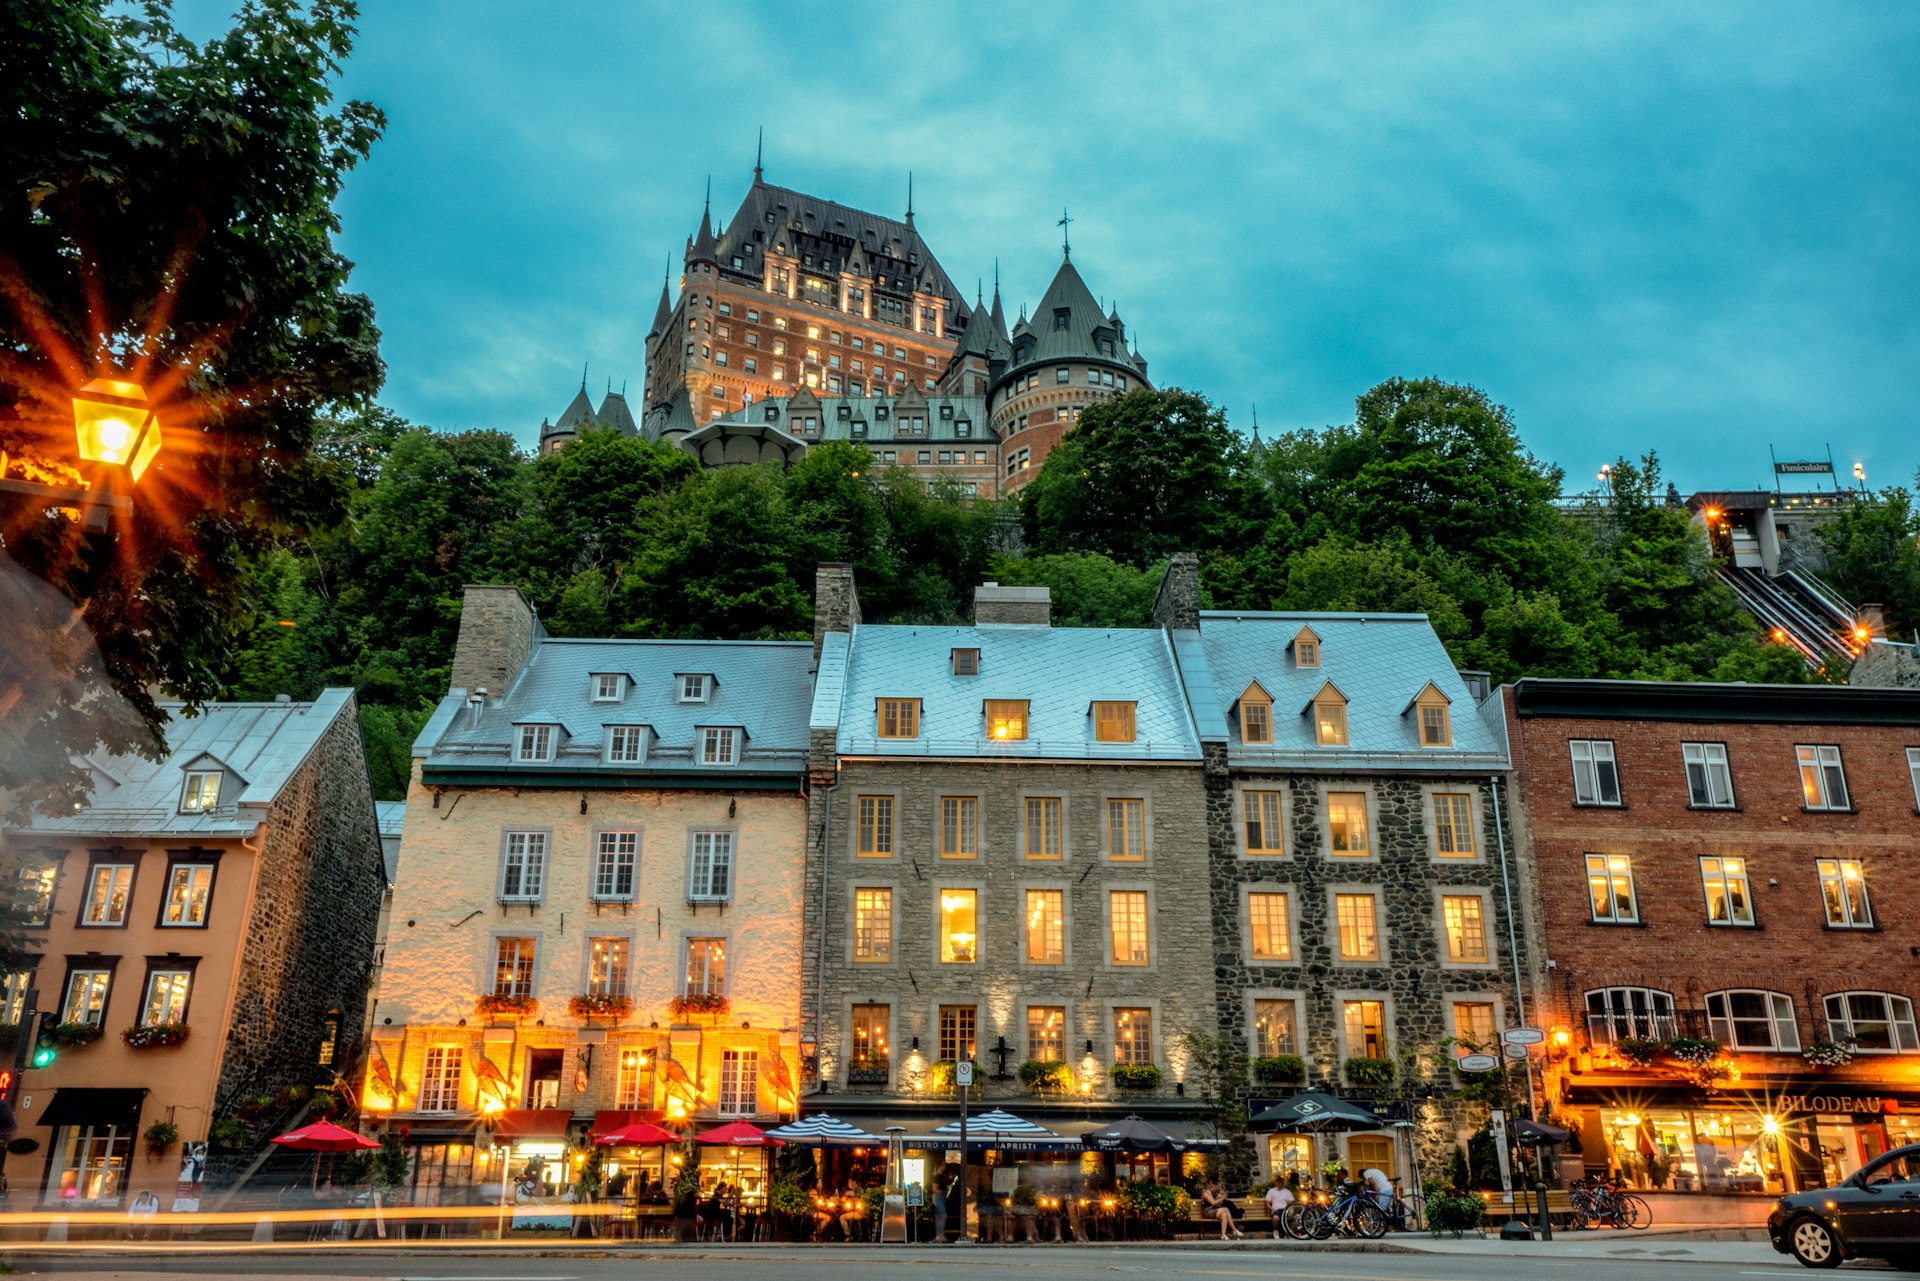 Chateau Frontenac Hotel in Quebec City, Province of Quebec, Canada